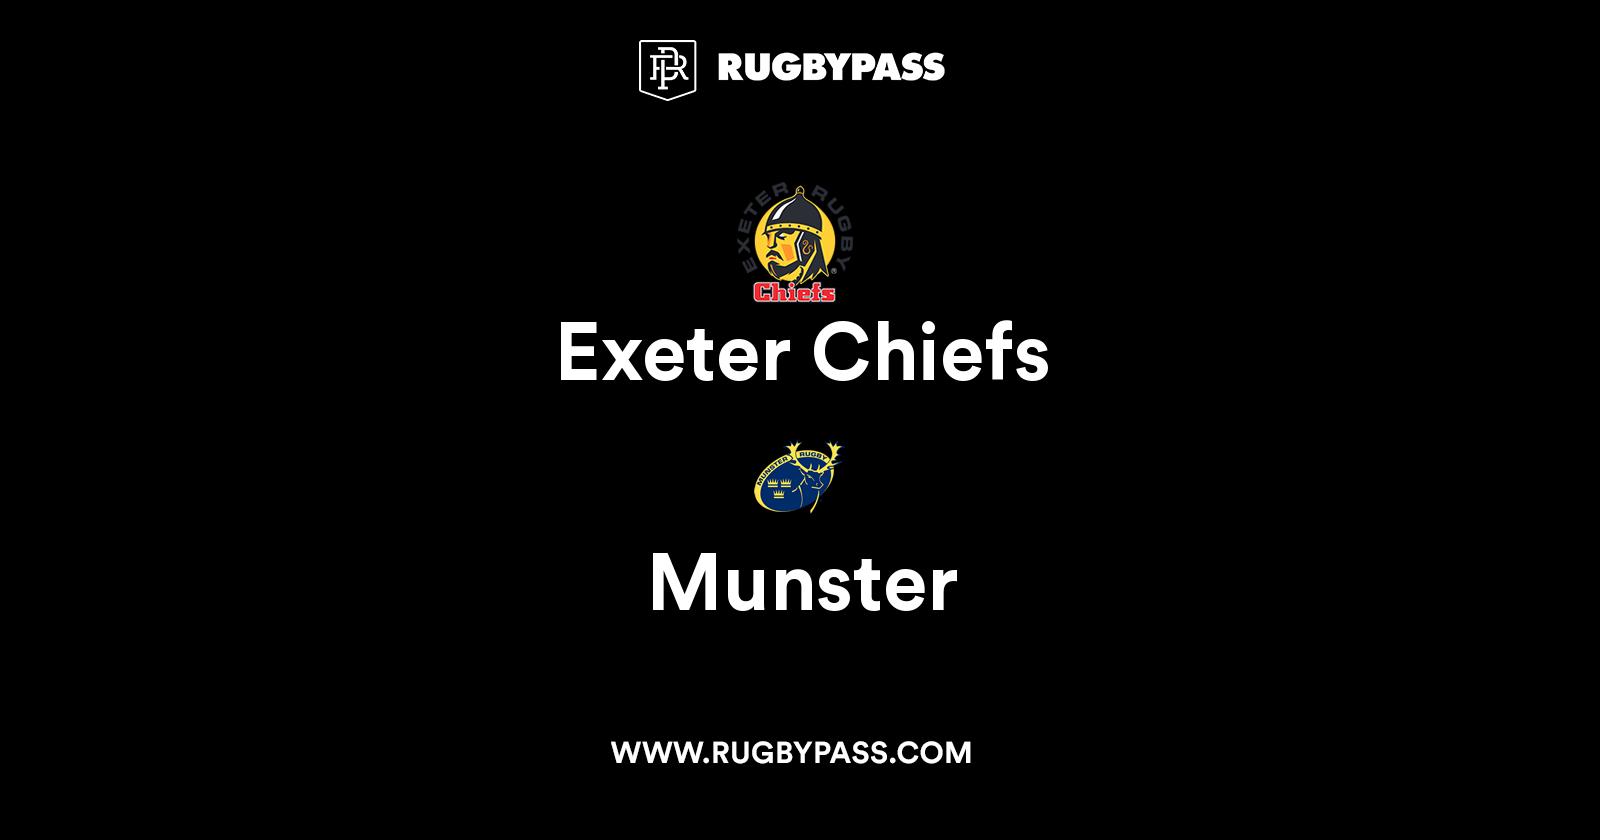 Exeter Chiefs vs Munster Live and Latest Rugby Union Scores and Results RugbyPass